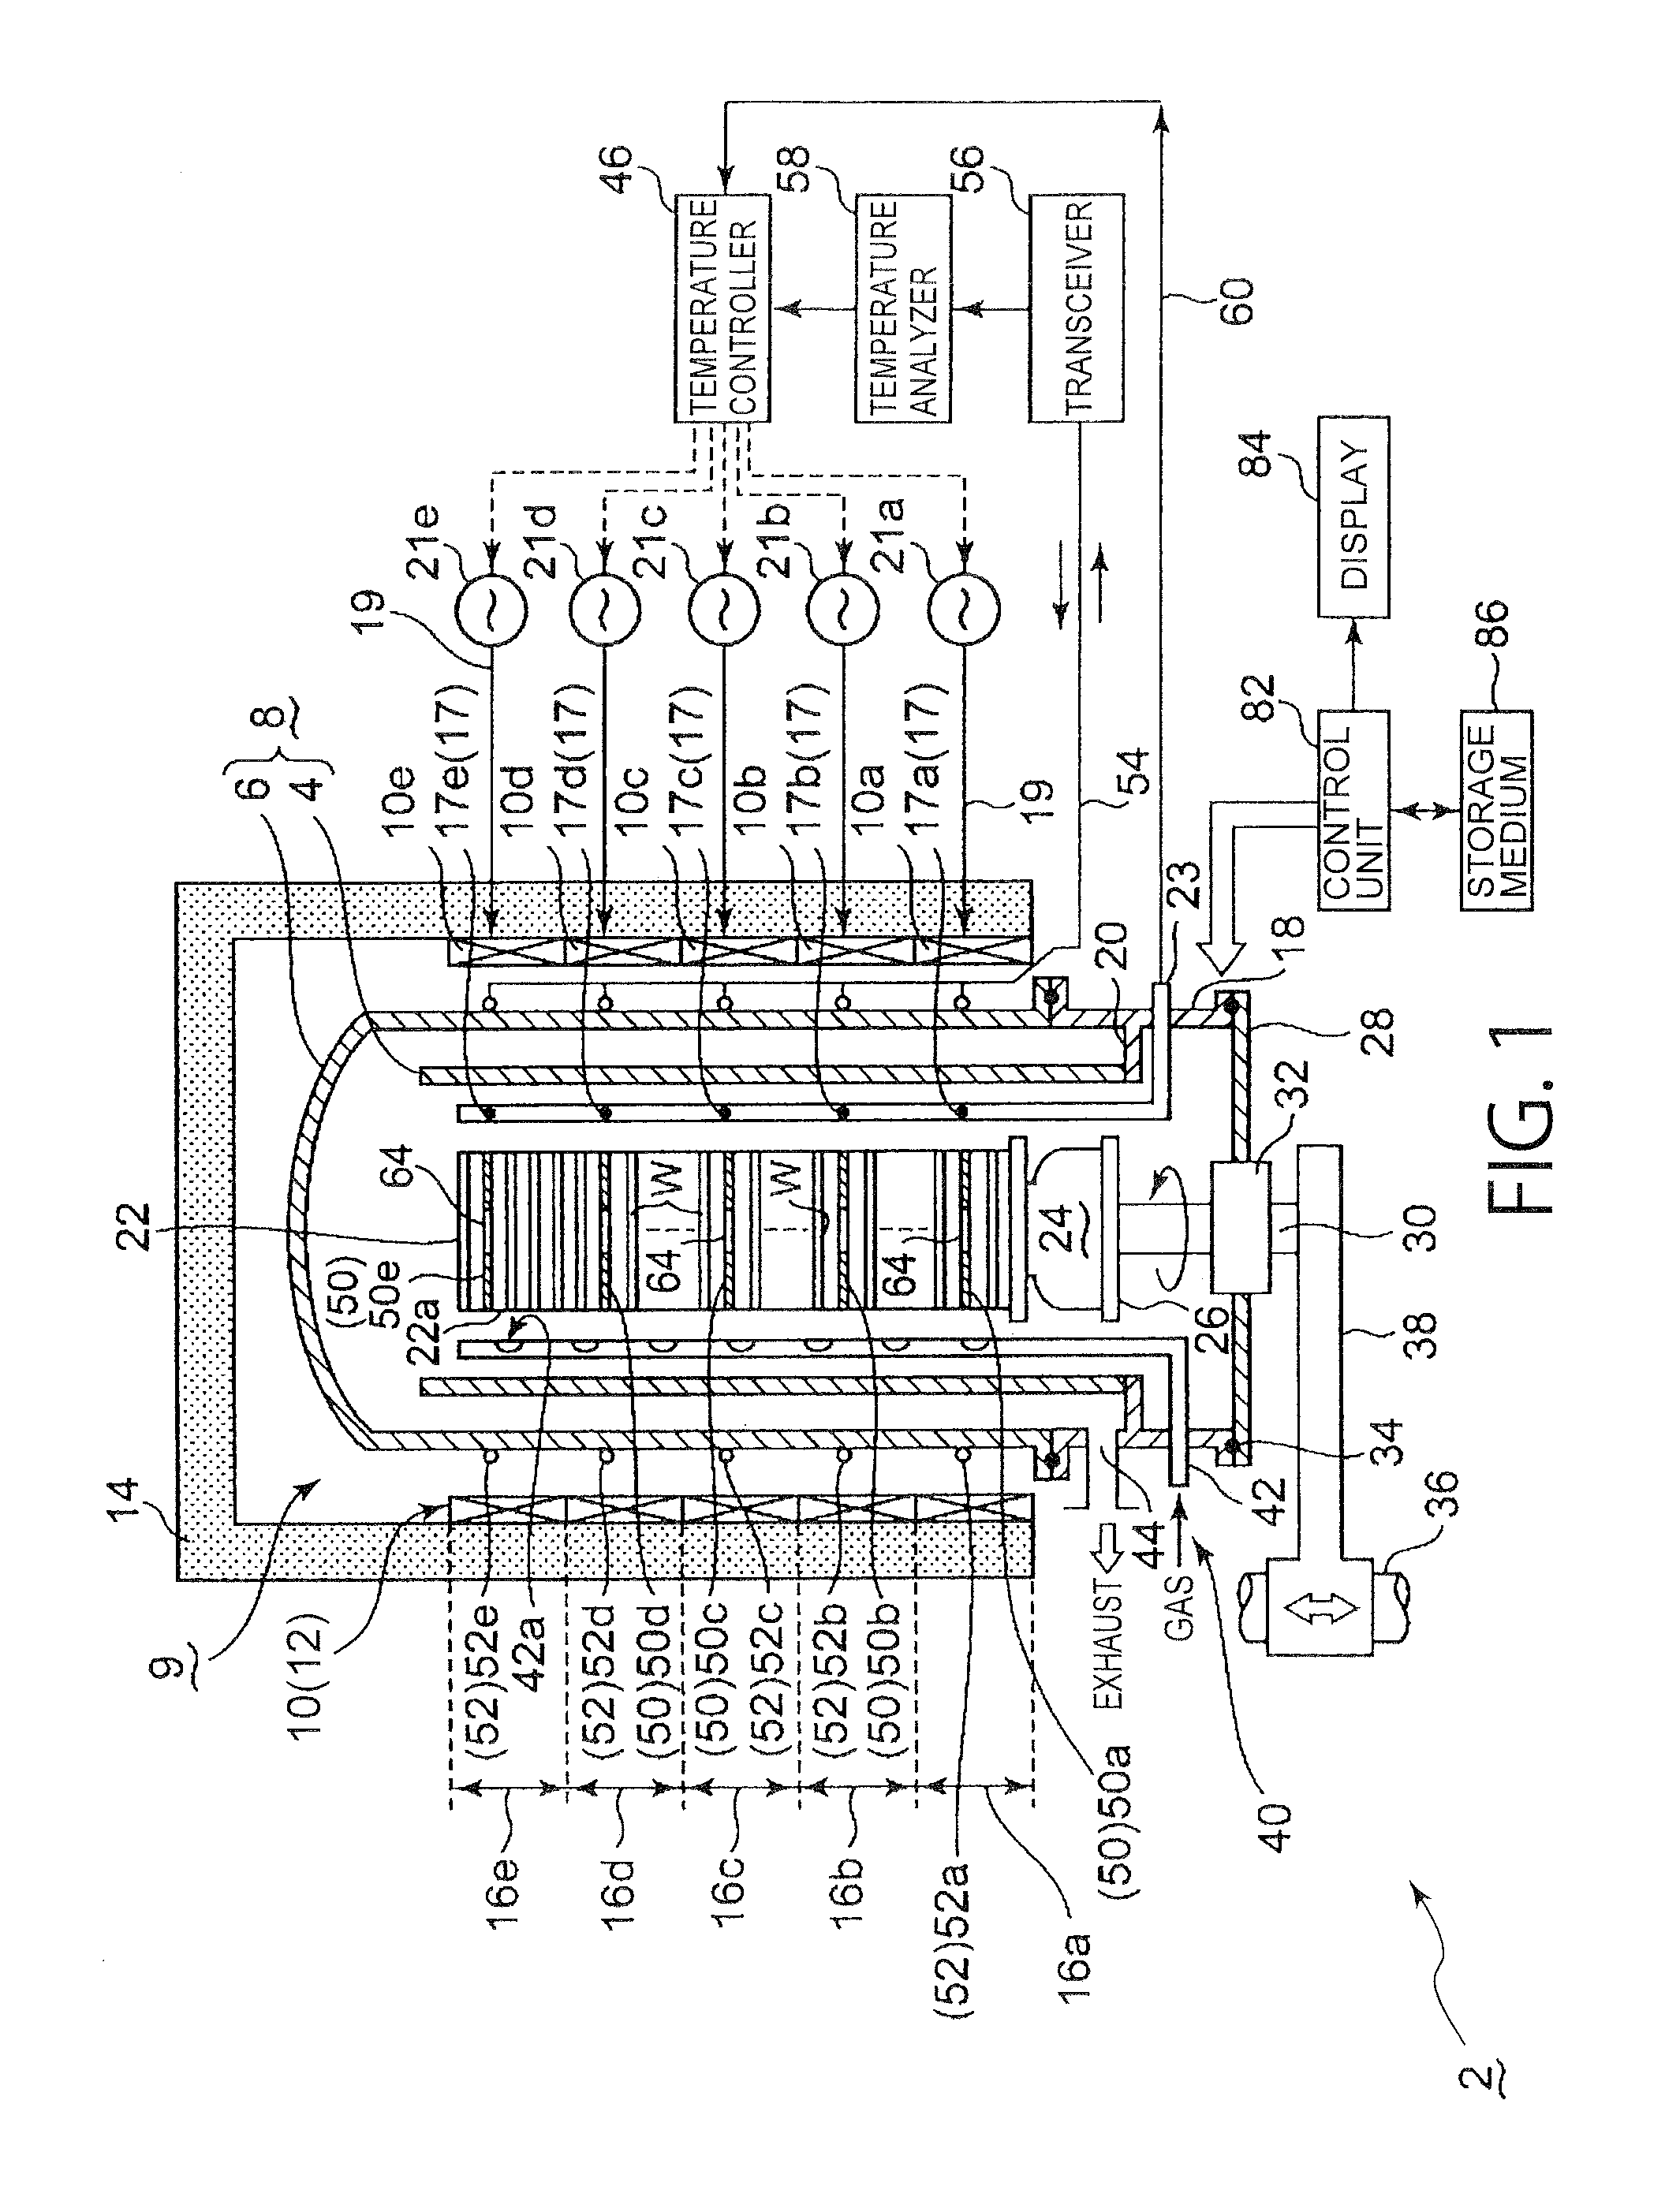 Temperature-measuring substrate and heat treatment apparatus